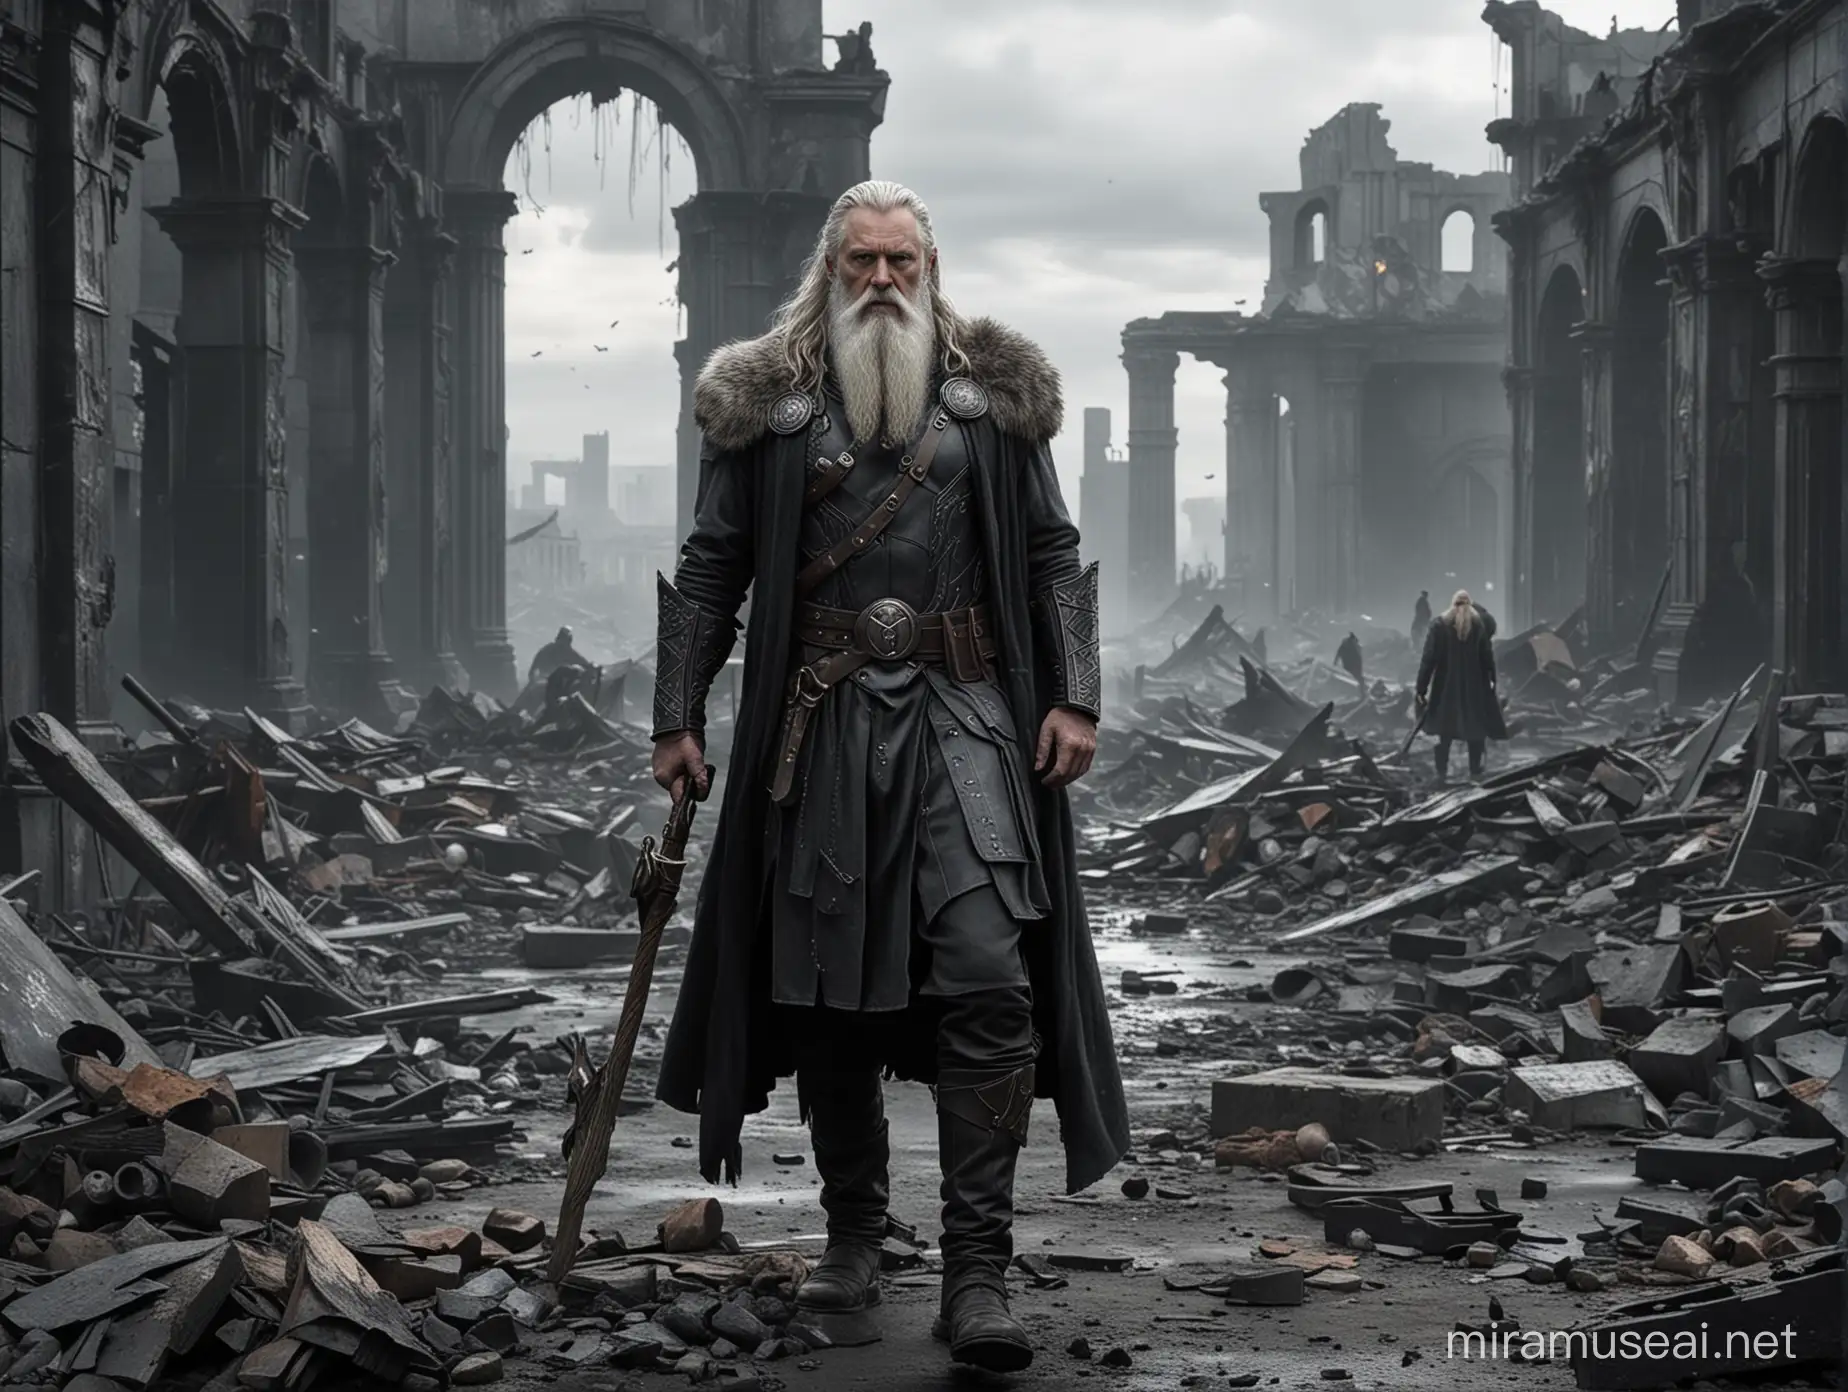 Create an image that shows Odin in apocalyptic world, among ruins of destroyed city appearing among survivors.  Make them appear more like men but still god like. style is dark, realistic, grim